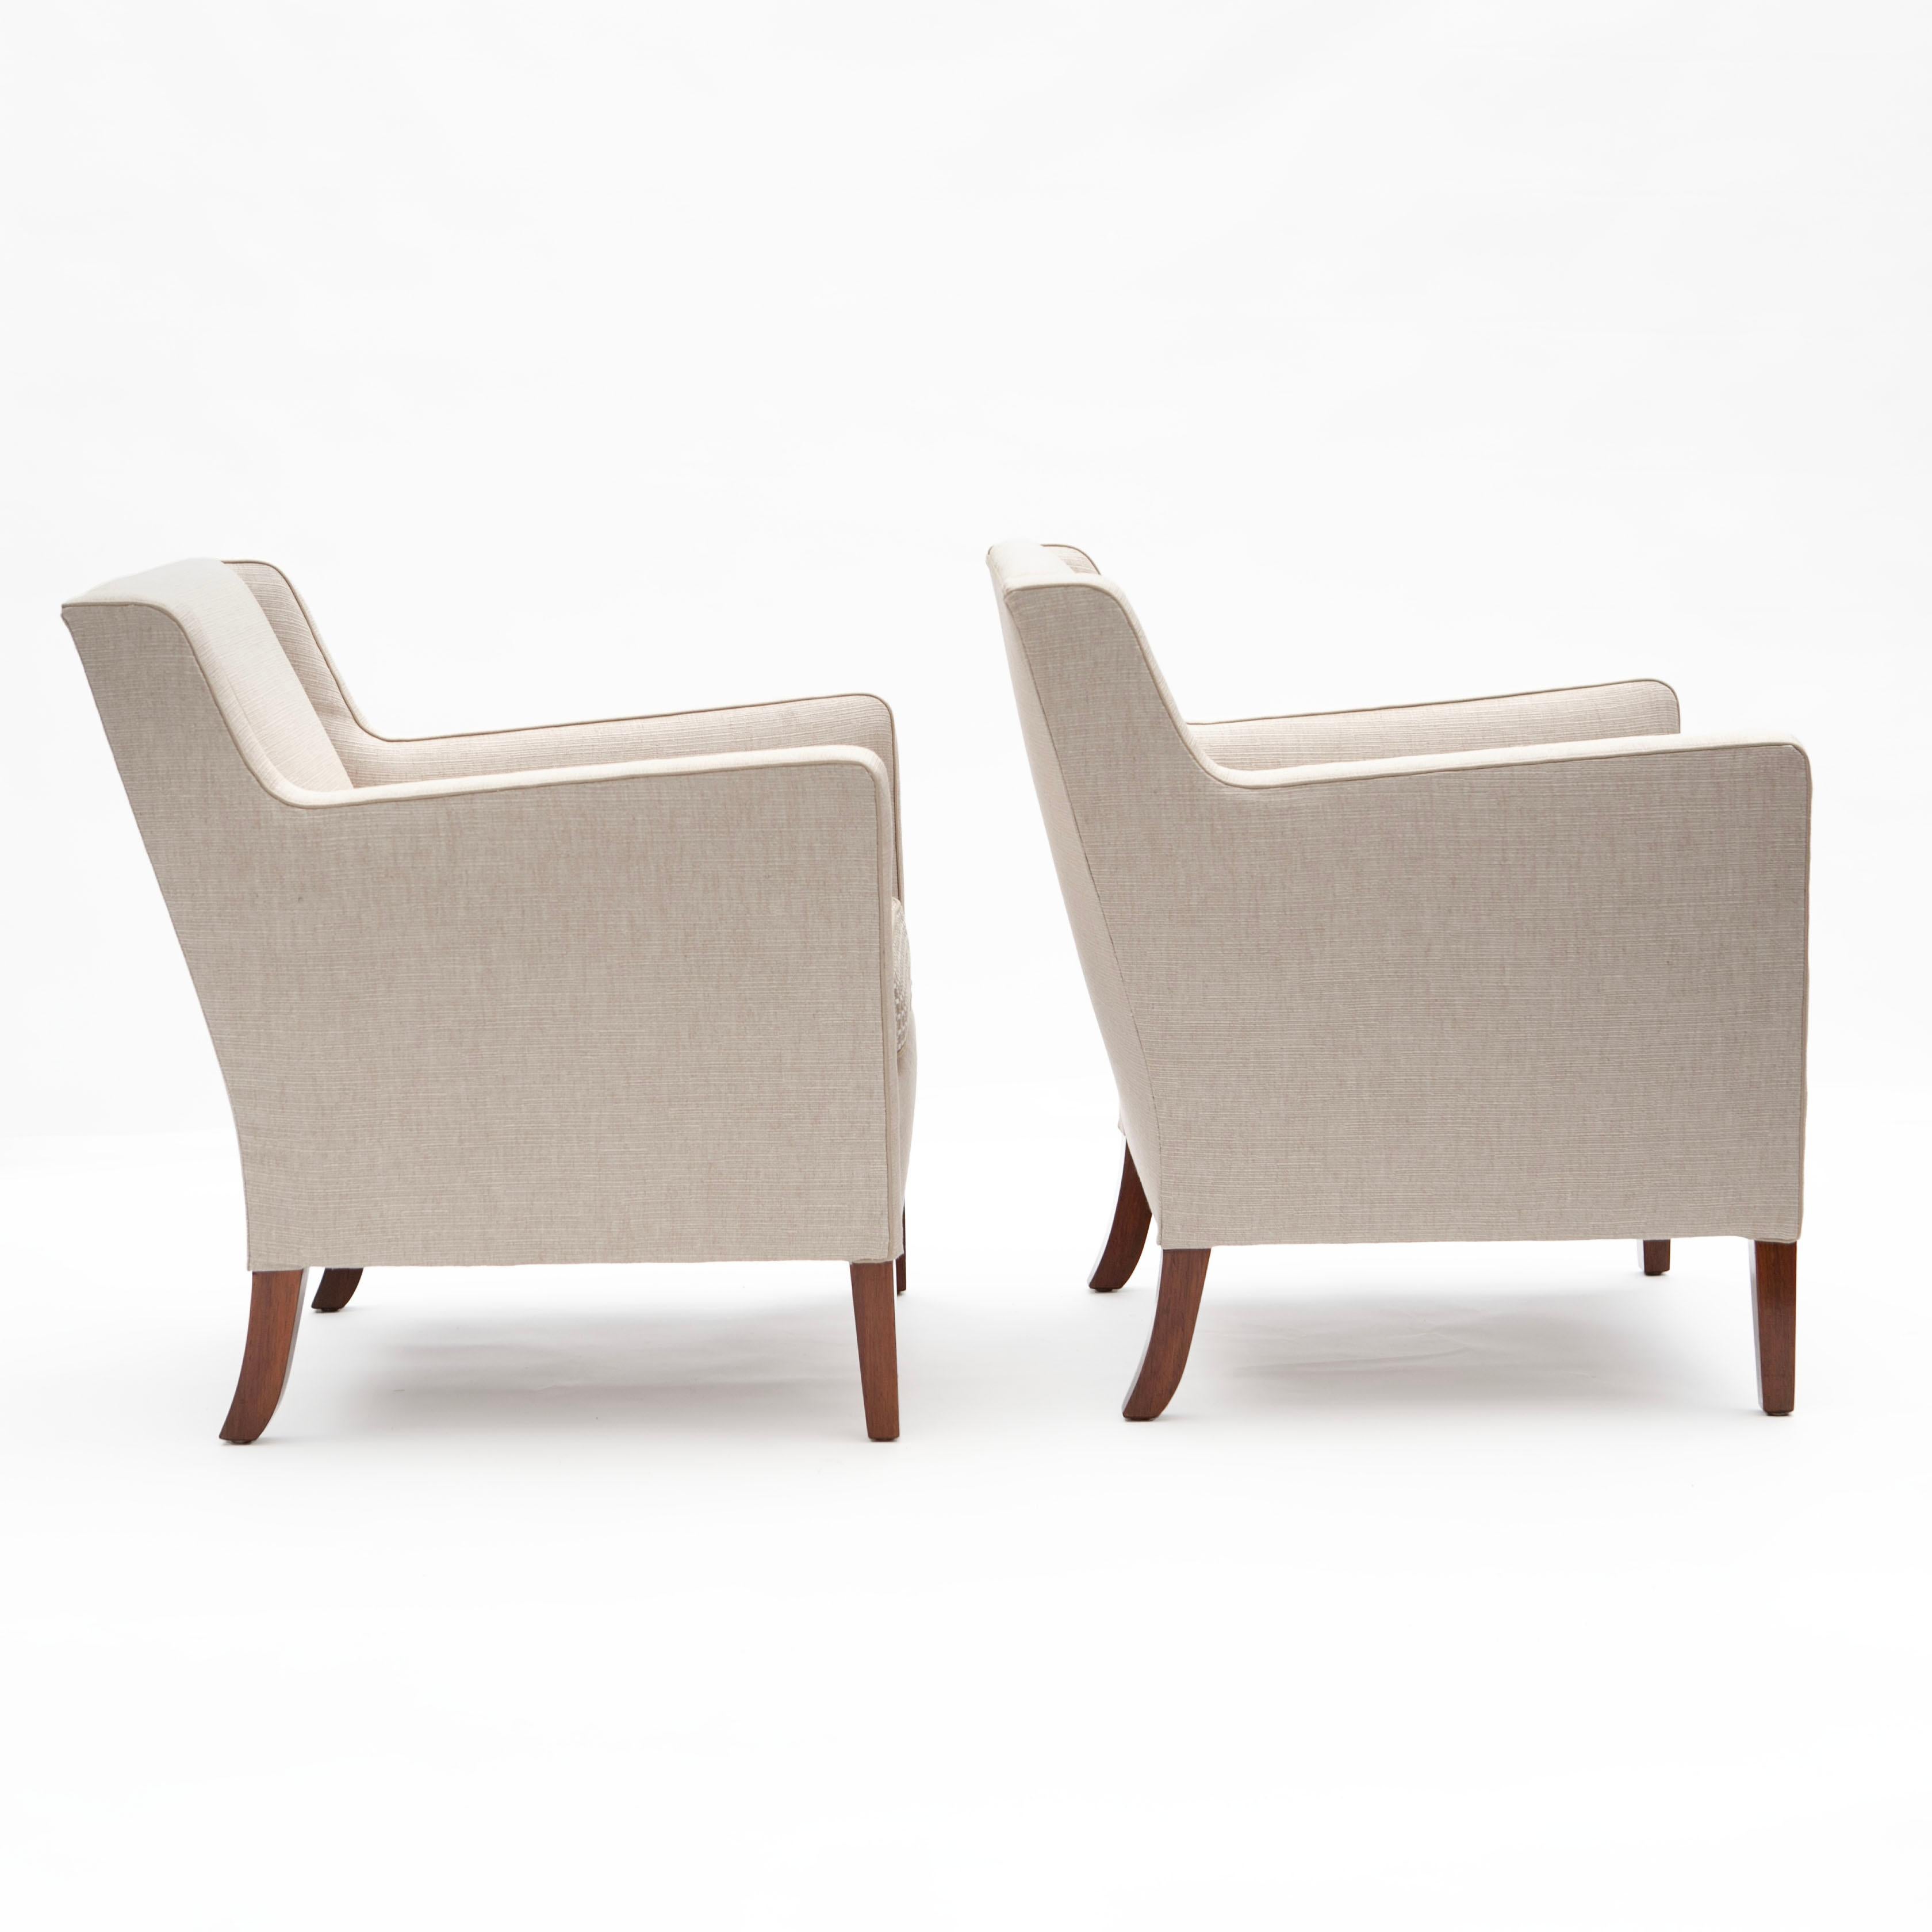 Pair of Frits Henningsen Lounge Chairs Denmark 1950's In Good Condition For Sale In Kastrup, DK